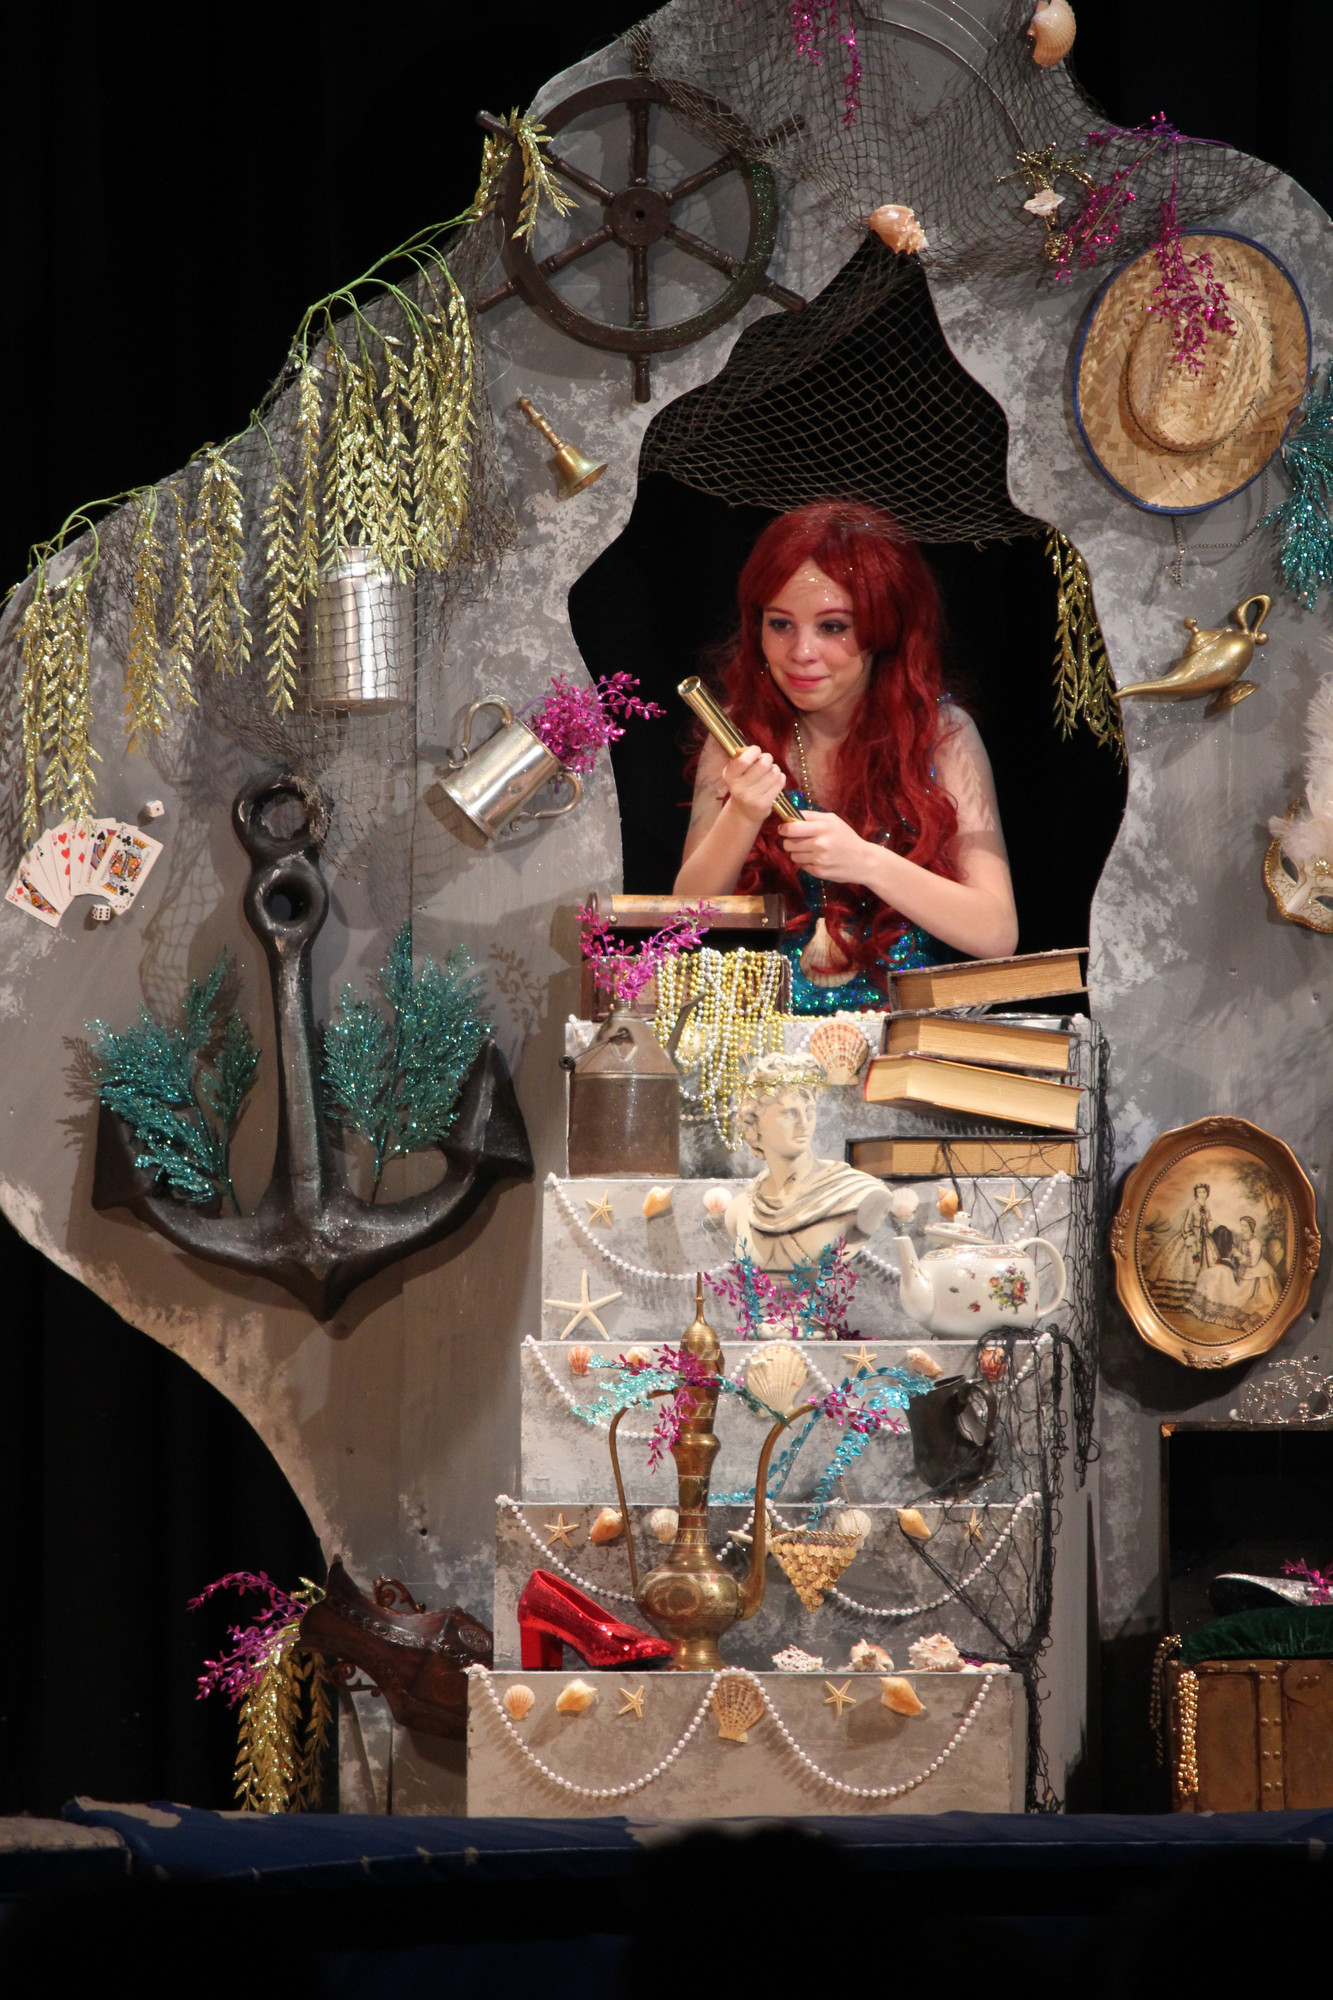 Ariel, played by Leana Genovese, admired the hidden treasures in her grotto.  Sets were designed by St. Agnes alum Colin O’Leary.